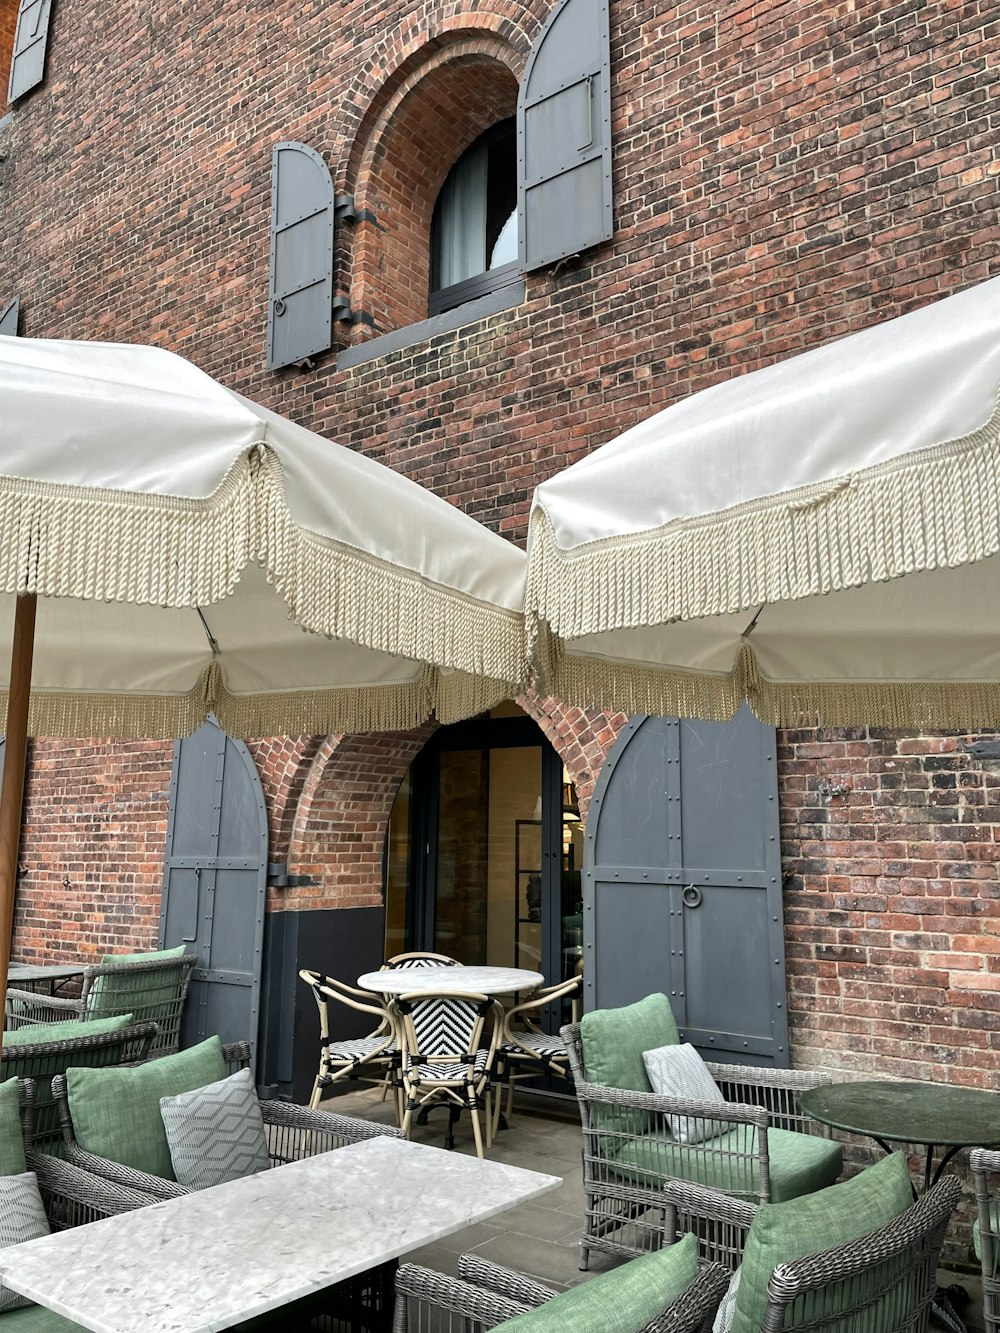 tables and chairs with umbrellas in front of a brick building